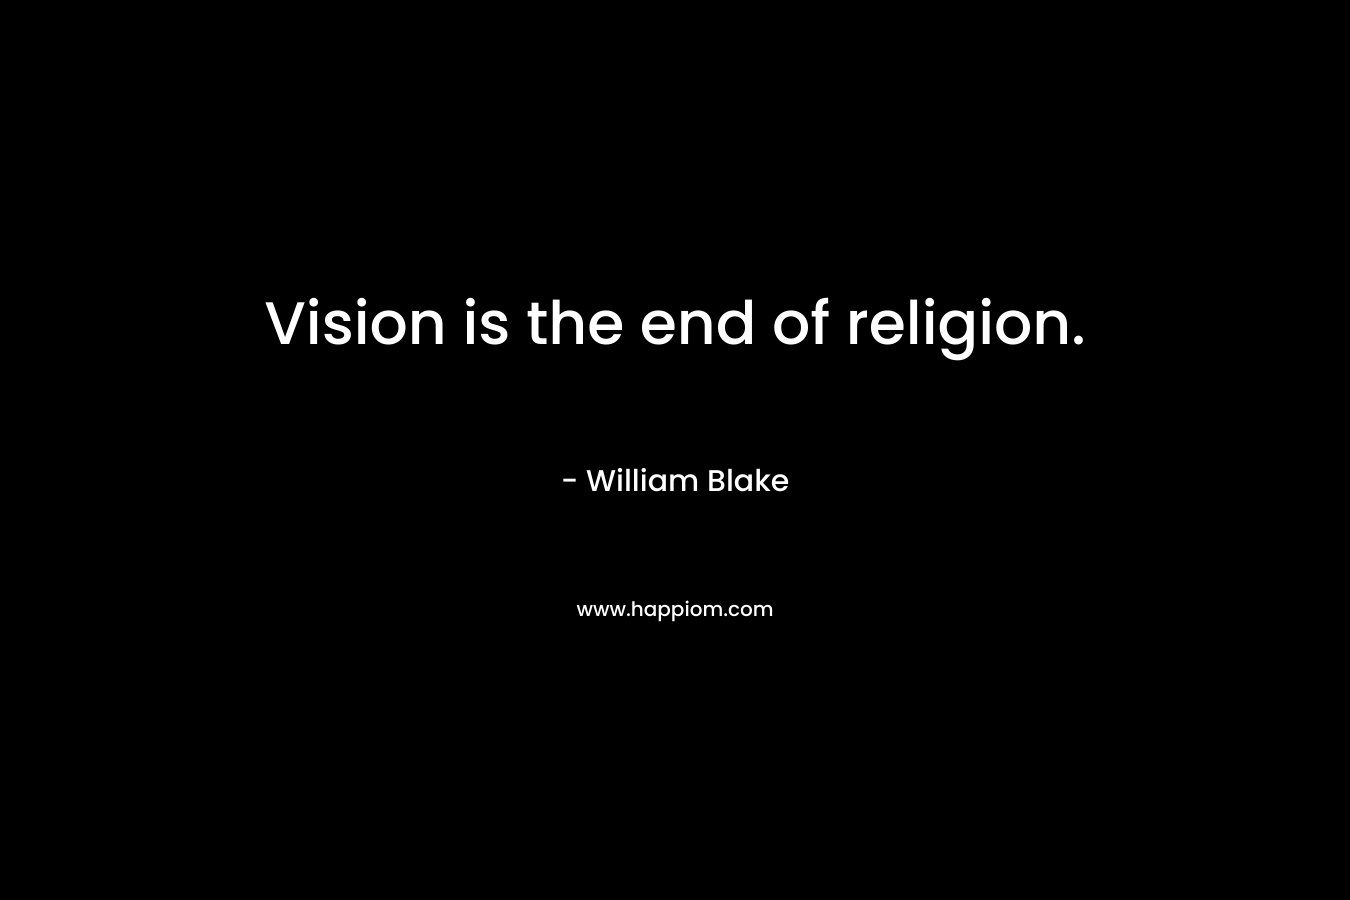 Vision is the end of religion. – William Blake